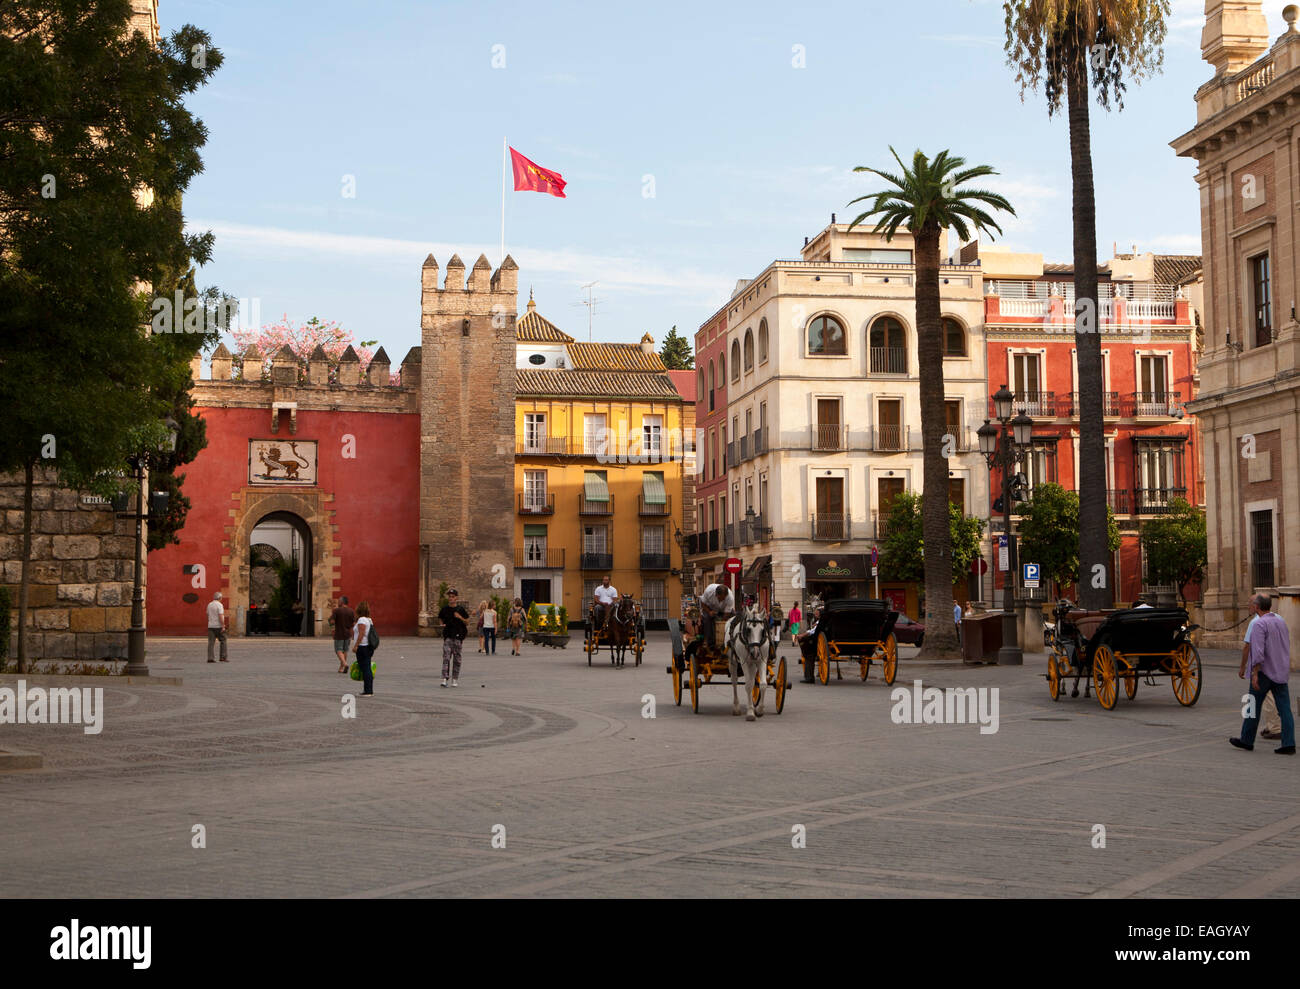 Horse and carriage rides for tourists through the historic central areas of Seville, Spain Stock Photo